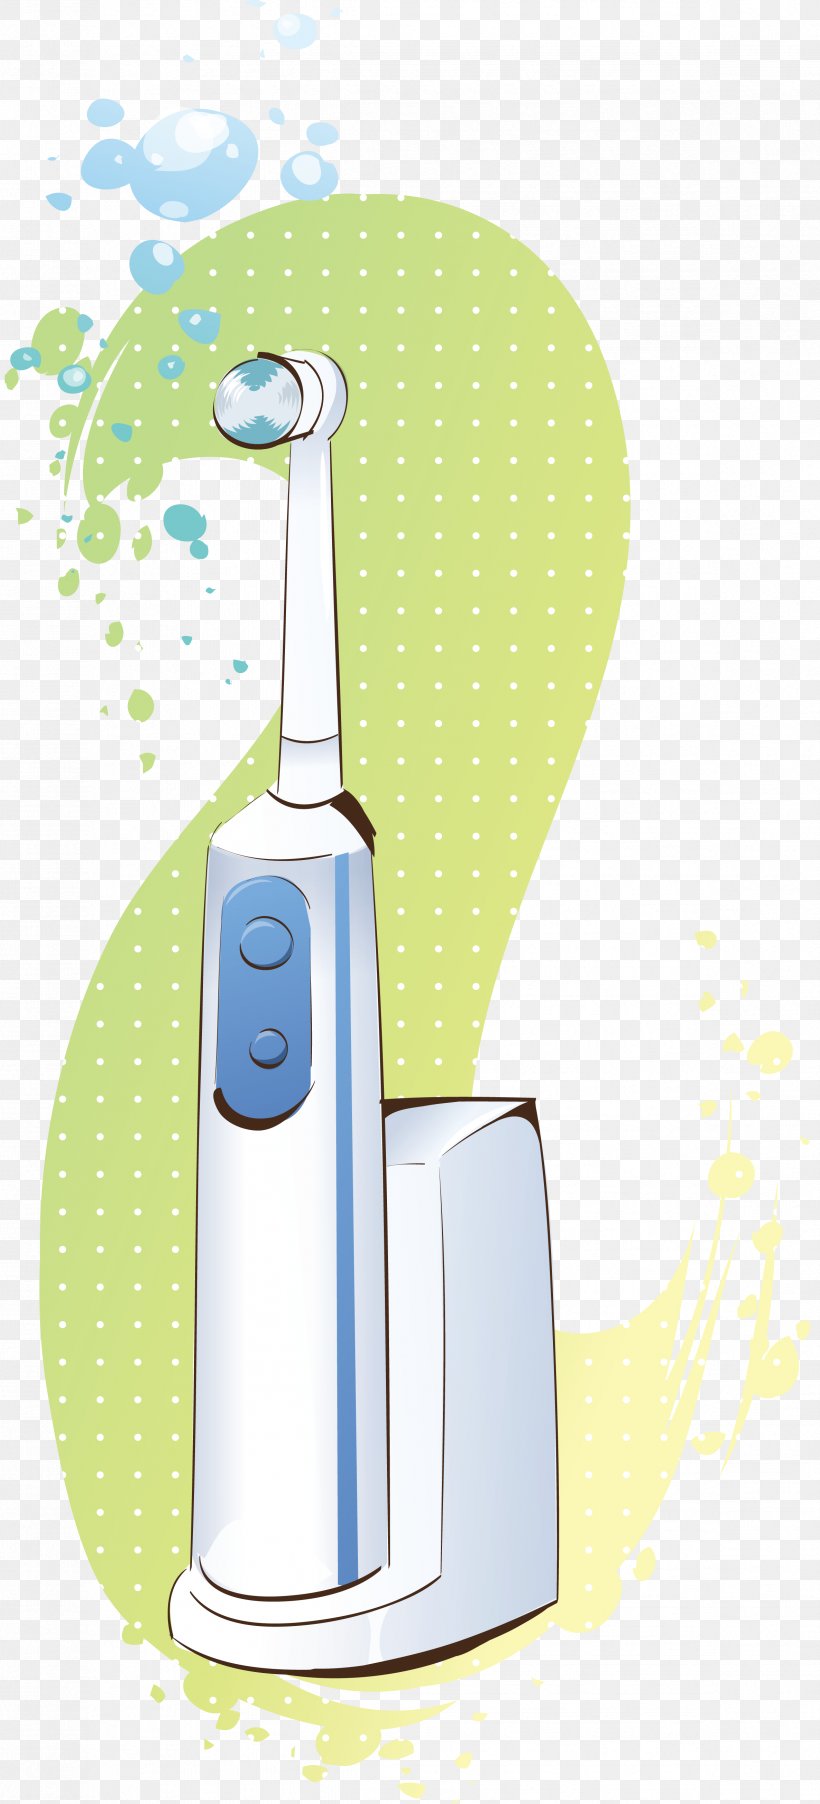 Electric Toothbrush Clip Art, PNG, 2371x5219px, Electric Toothbrush, Brush, Cartoon, Drinkware, Tooth Download Free